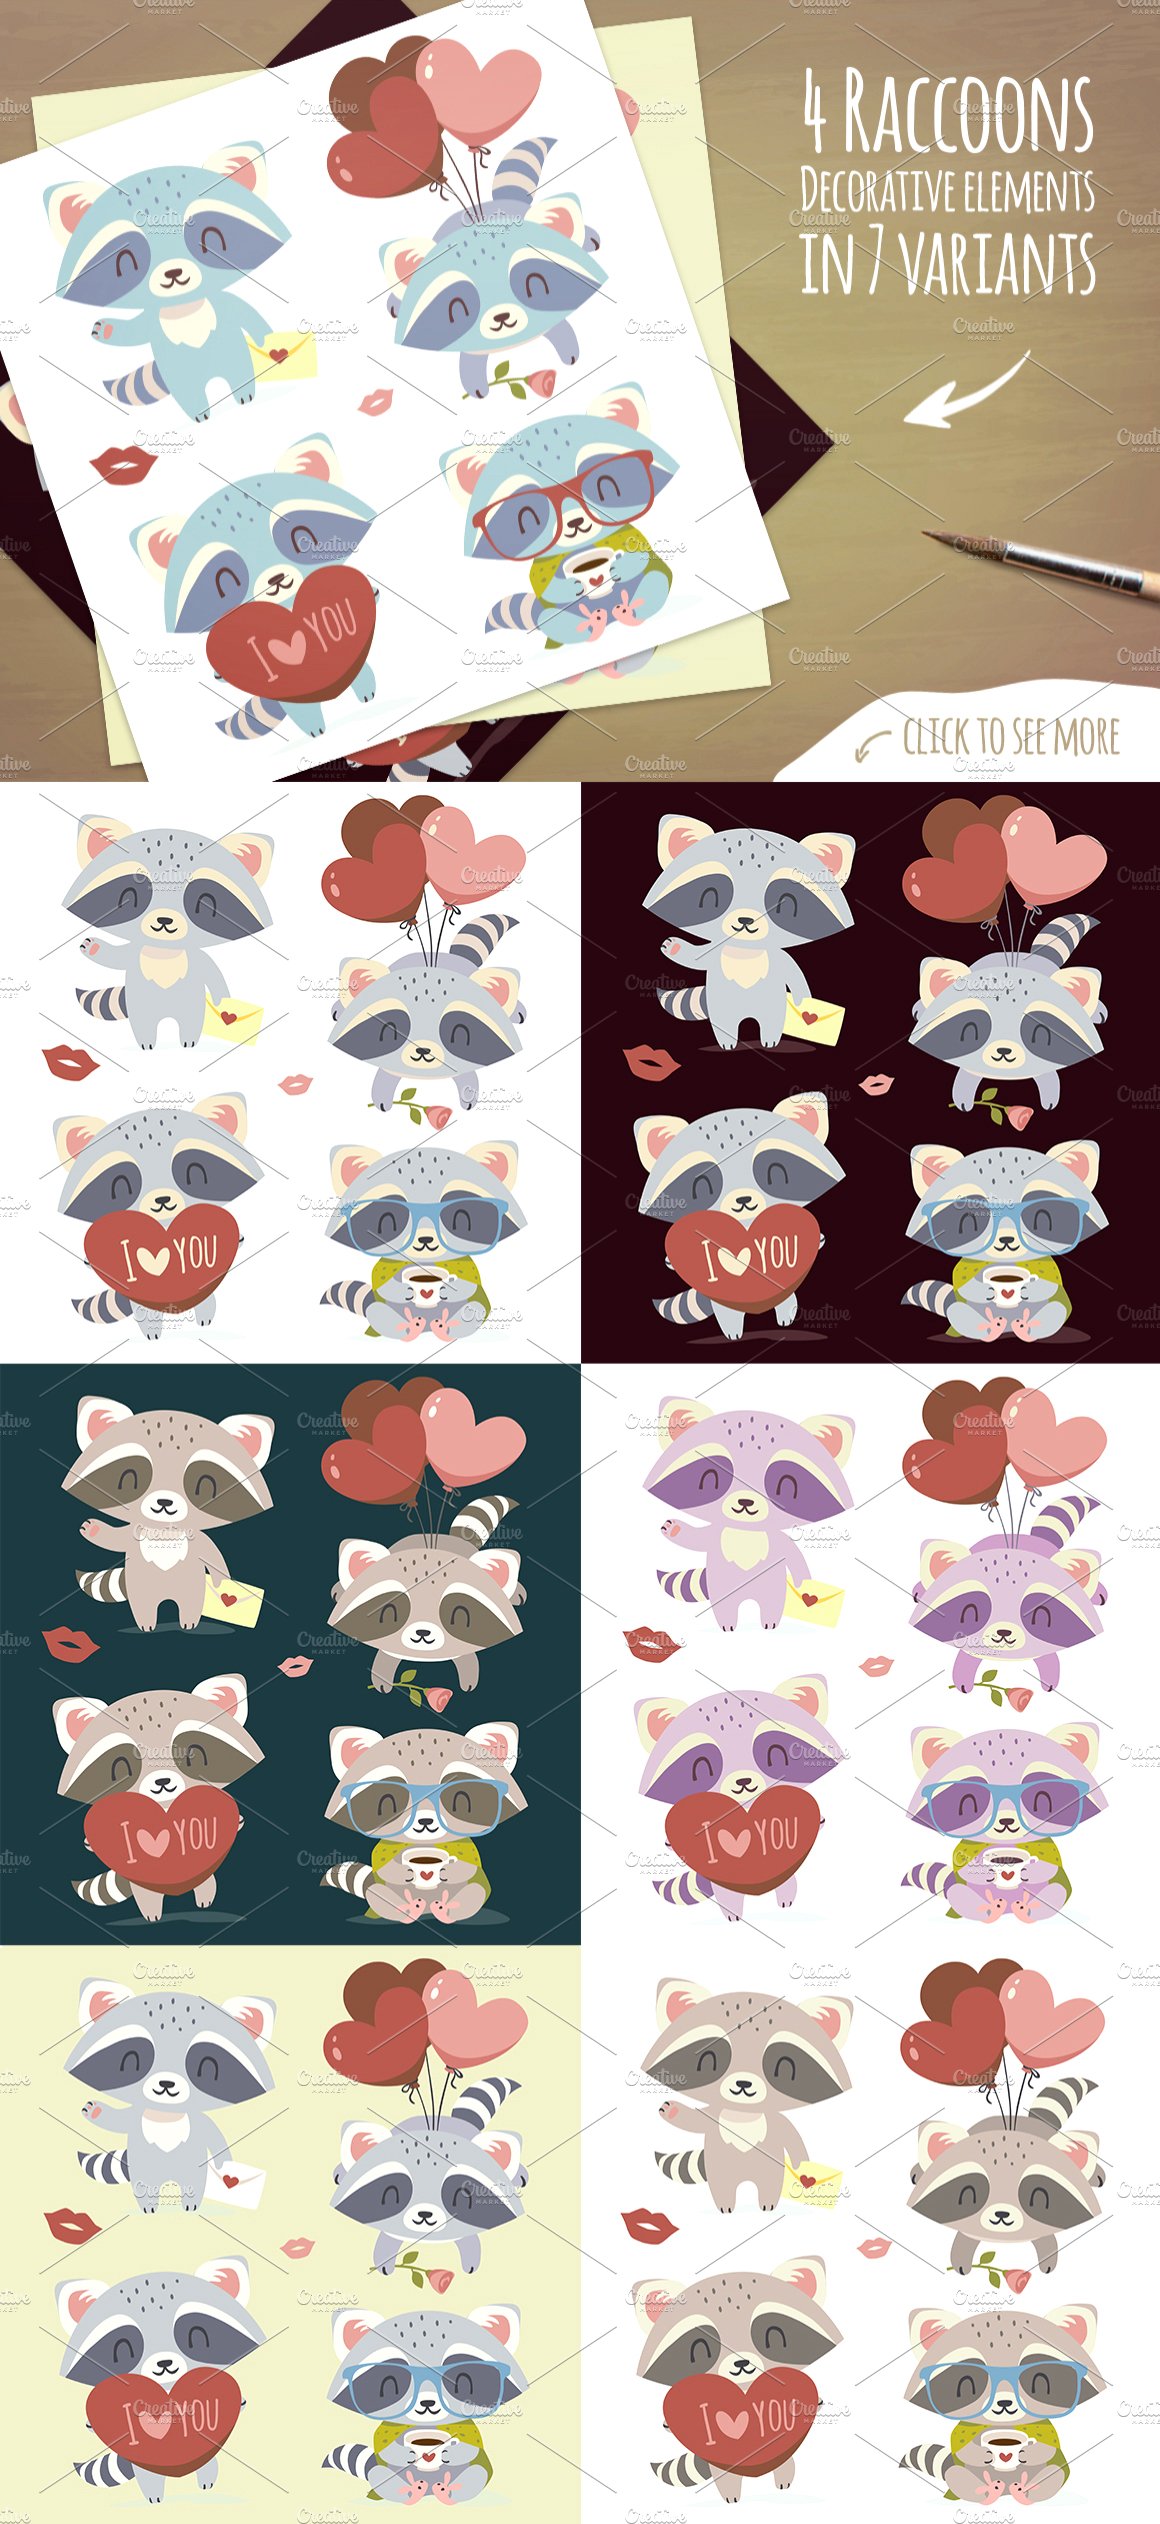 St. Valentine's Day Raccoon Set preview image.